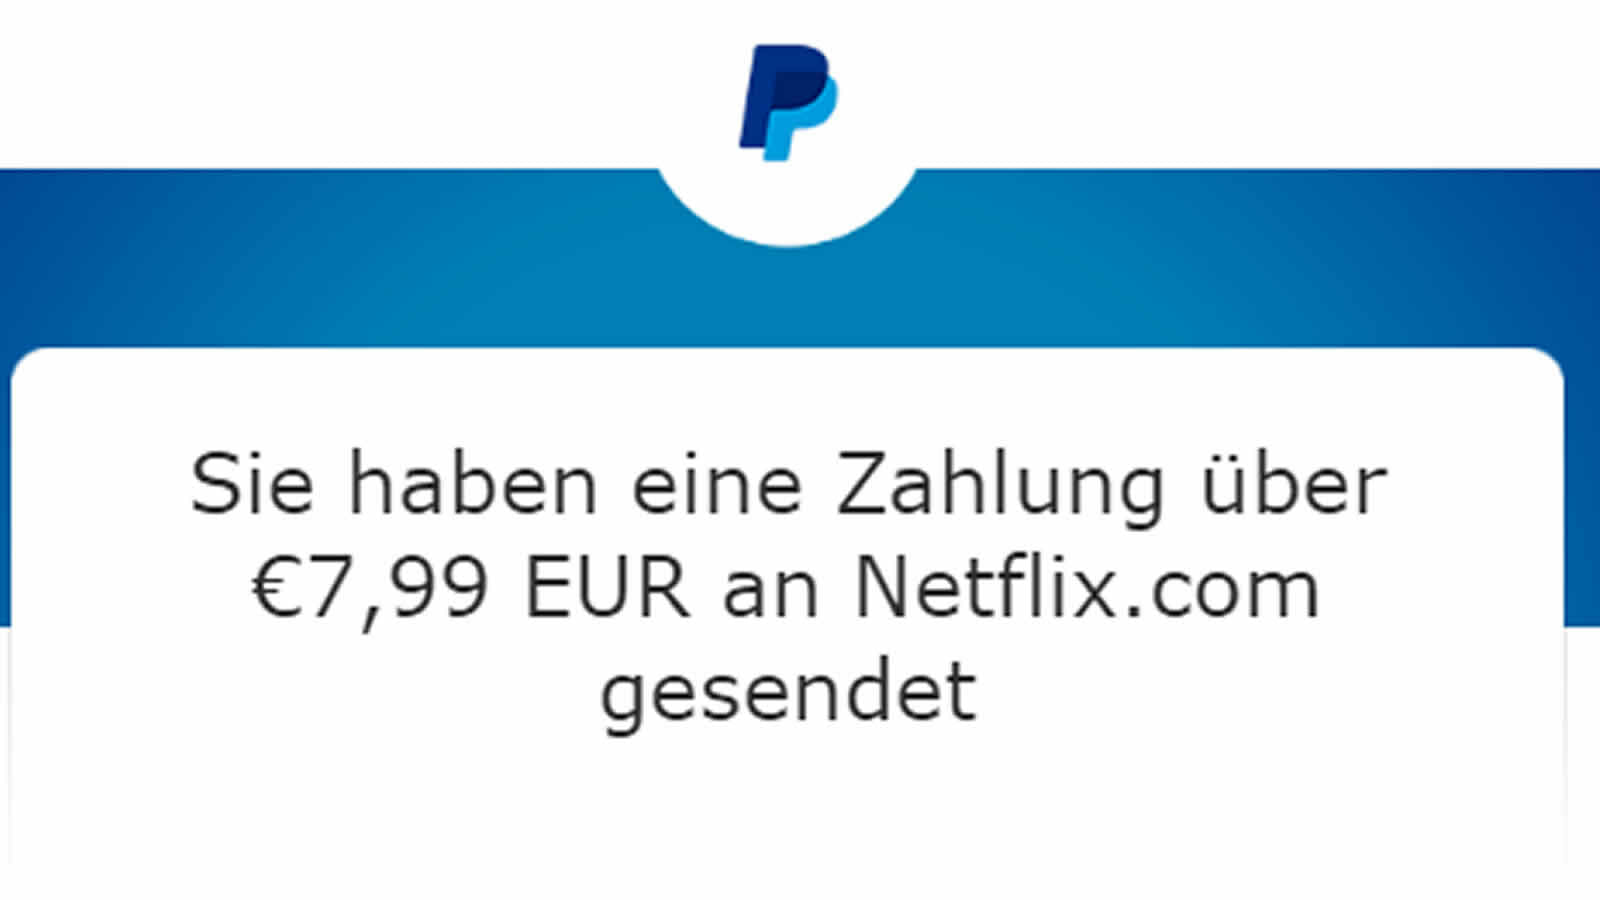 PayPal-Phishing: Zahlung an Netflix